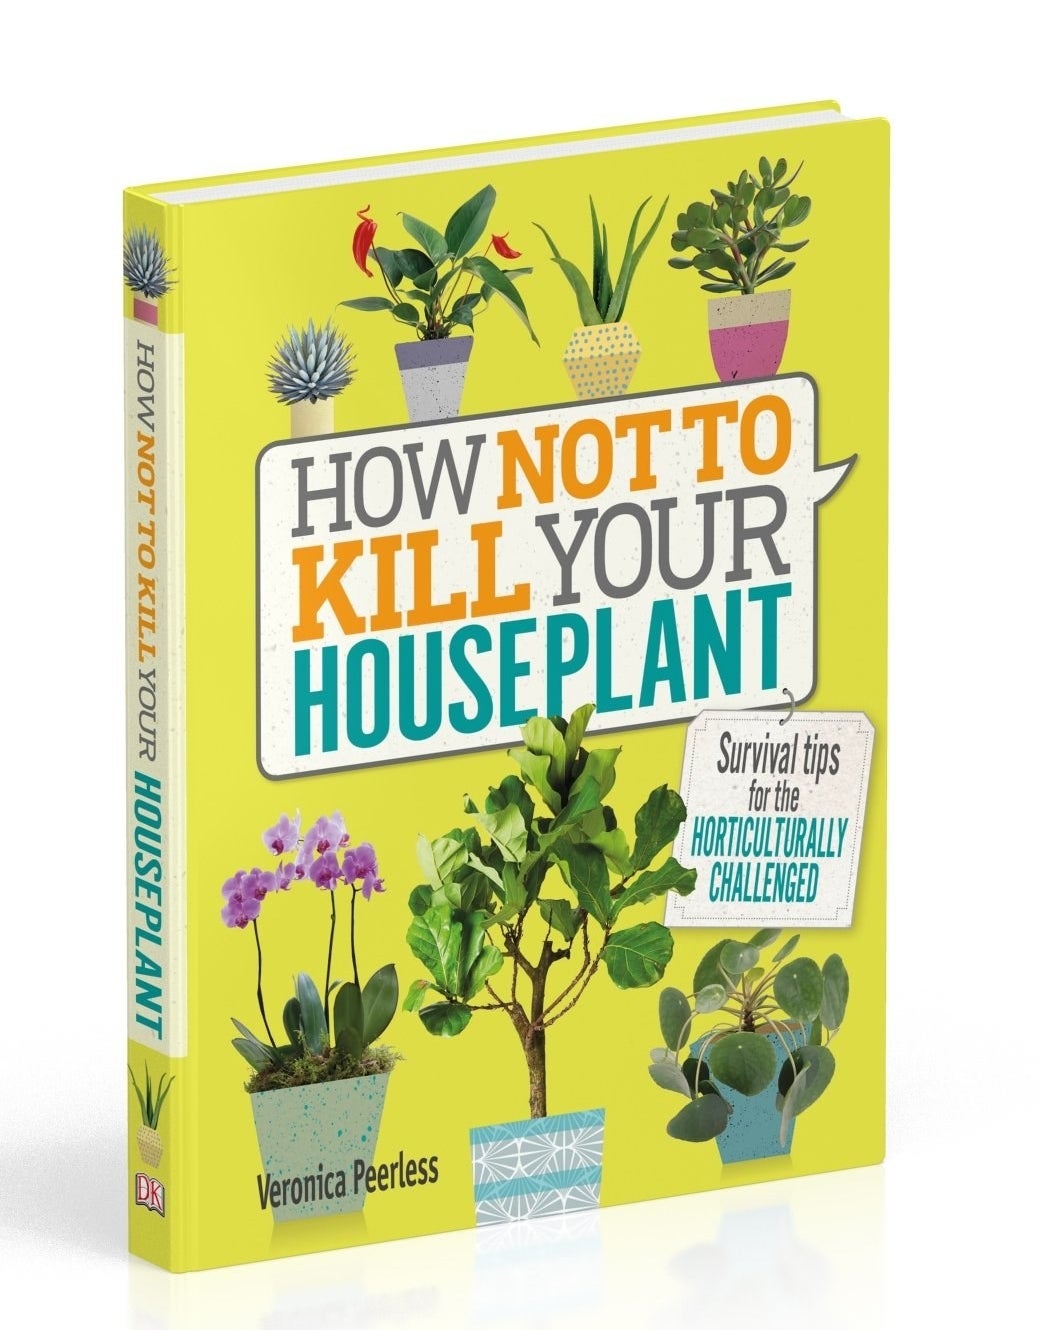 A book titled how not to kill your houseplant